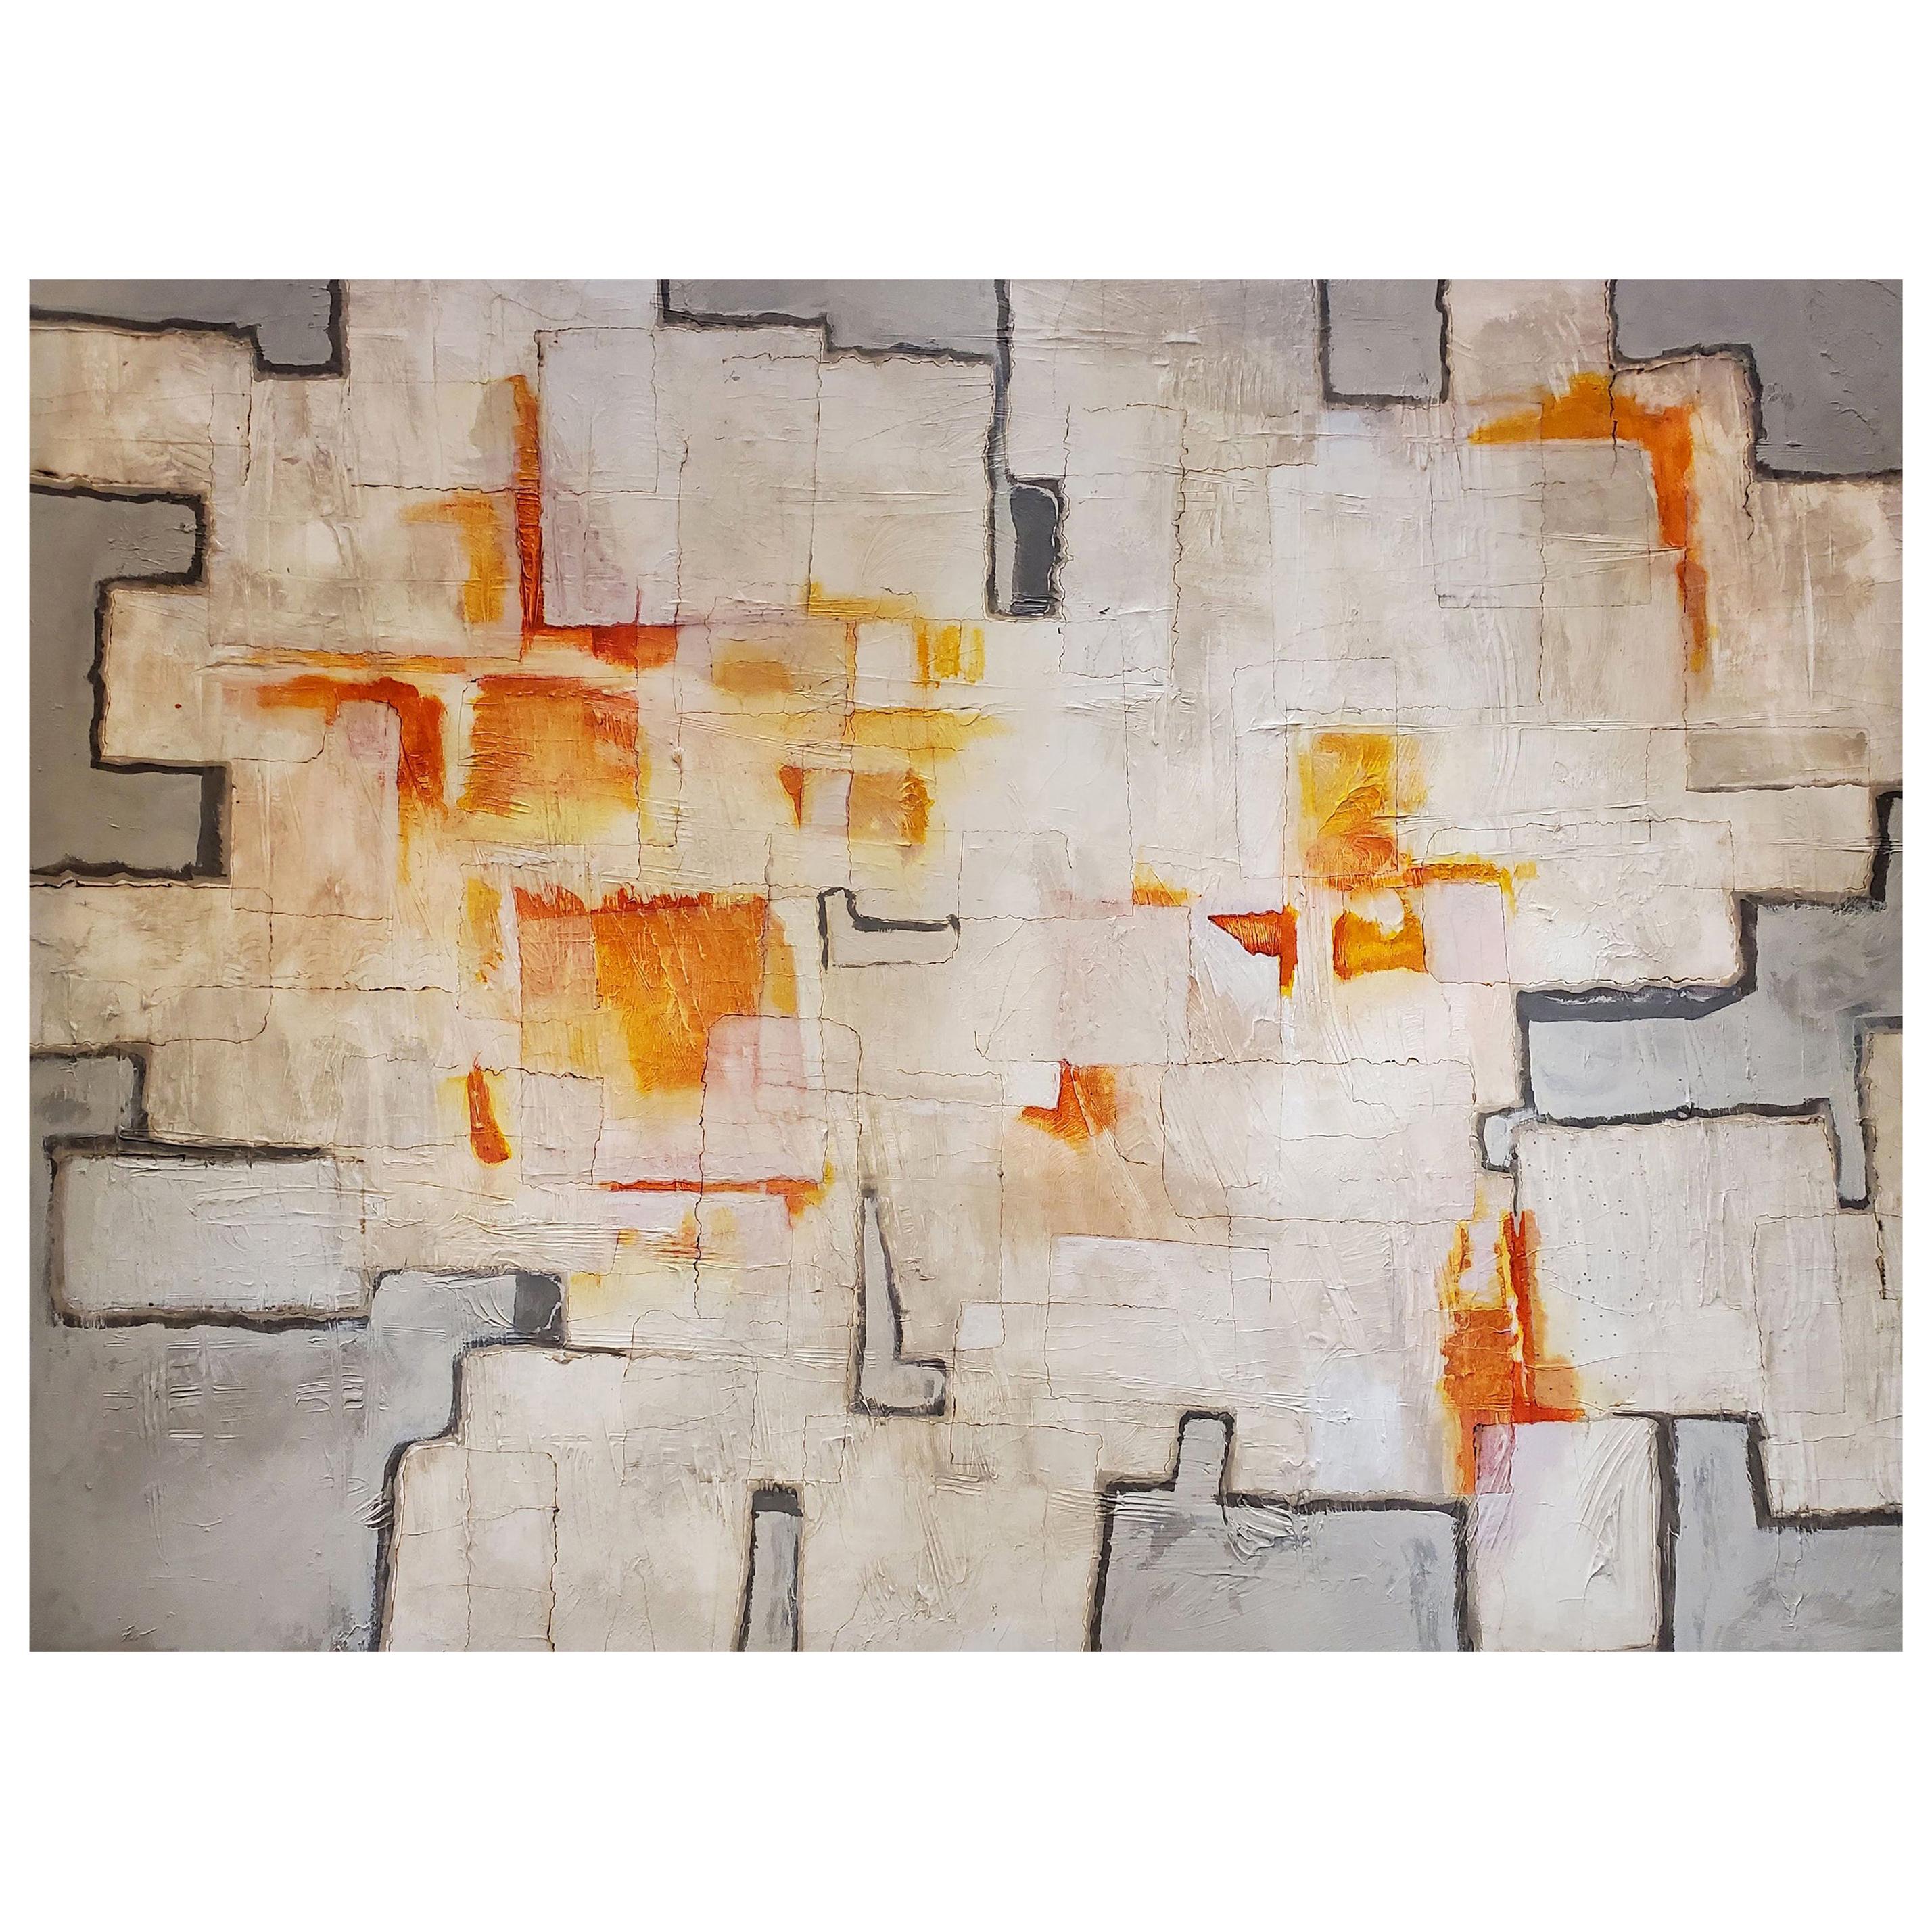 "Shadow Fires", Orange, White, Grey Abstract Mixed-Media Painting on Canvas